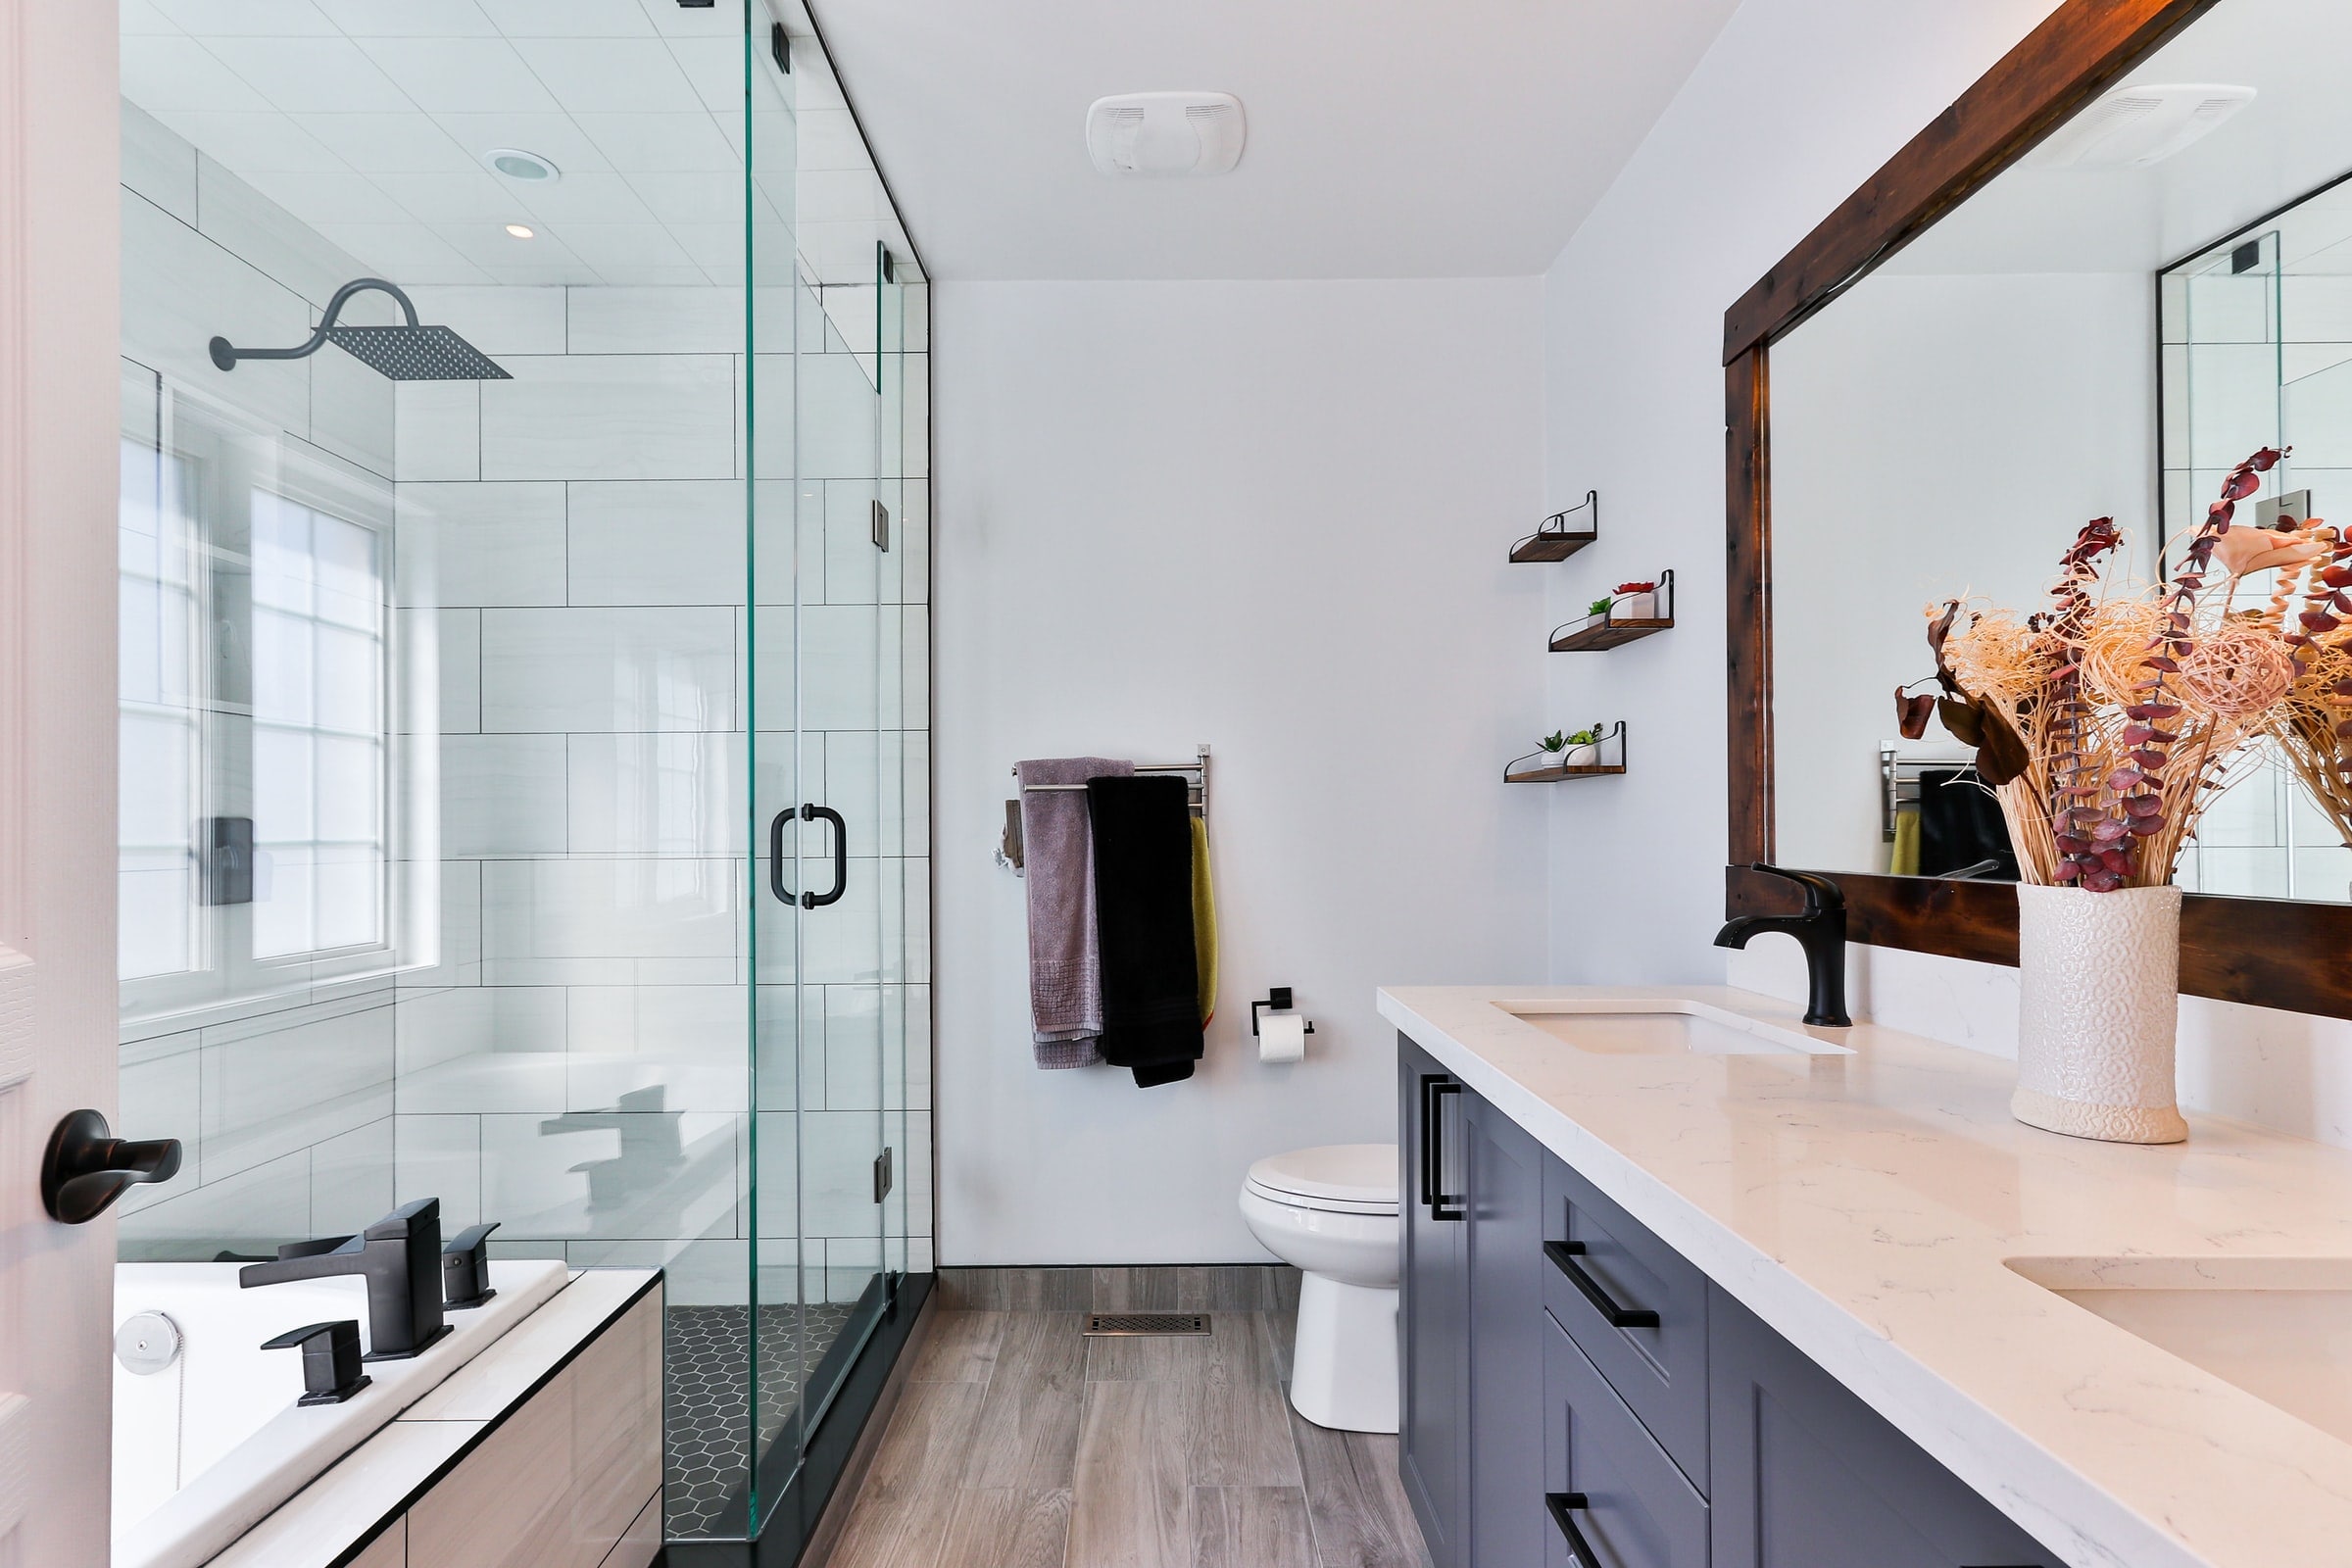 Average Nyc Renovation Cost, How Much Does It Cost To Renovate A Bathroom In Nyc